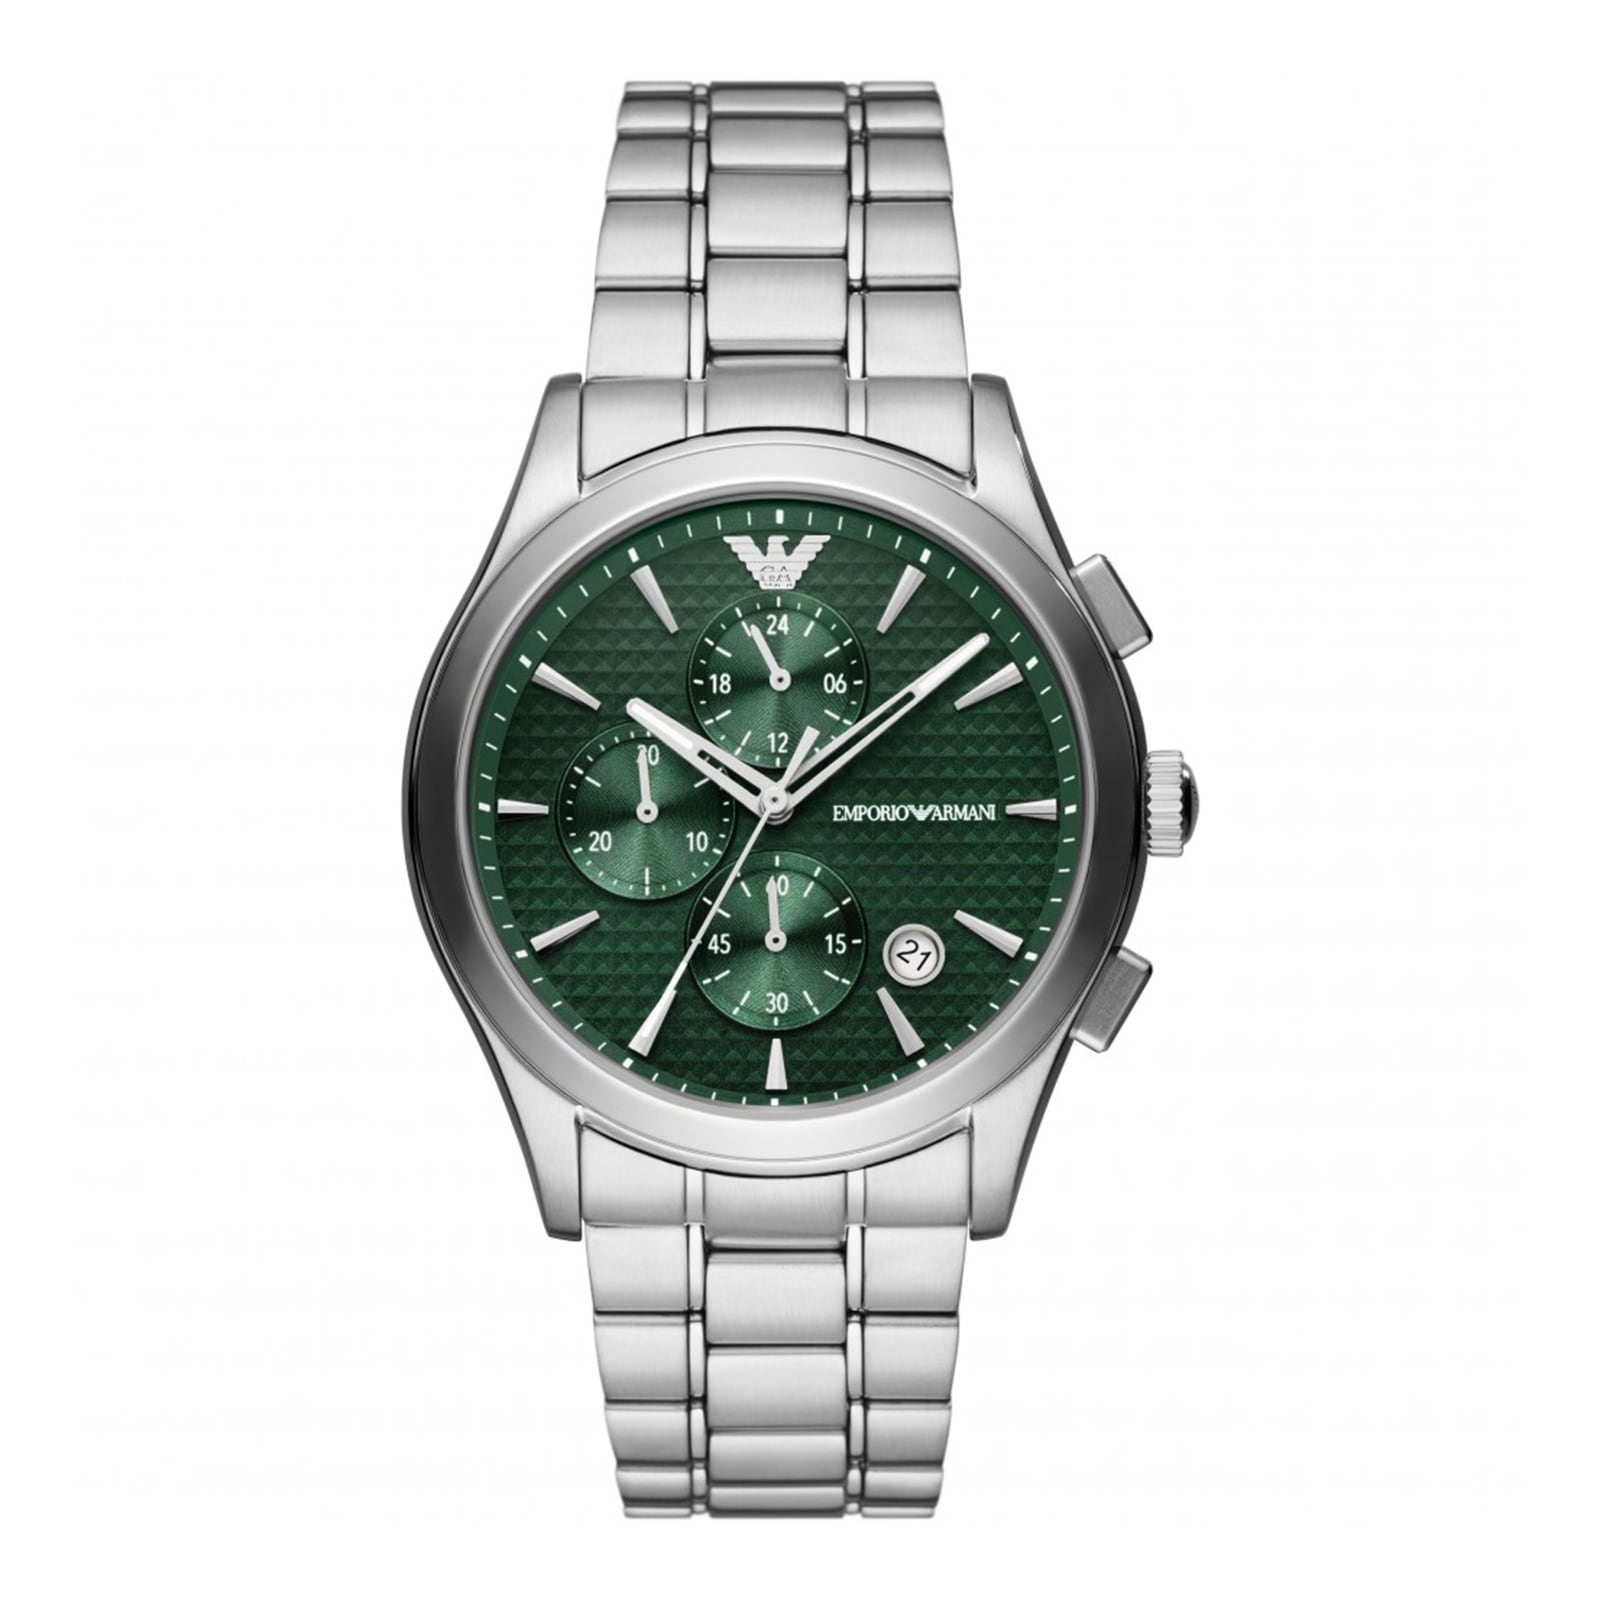 Paolo Mens Watch 42mm Green